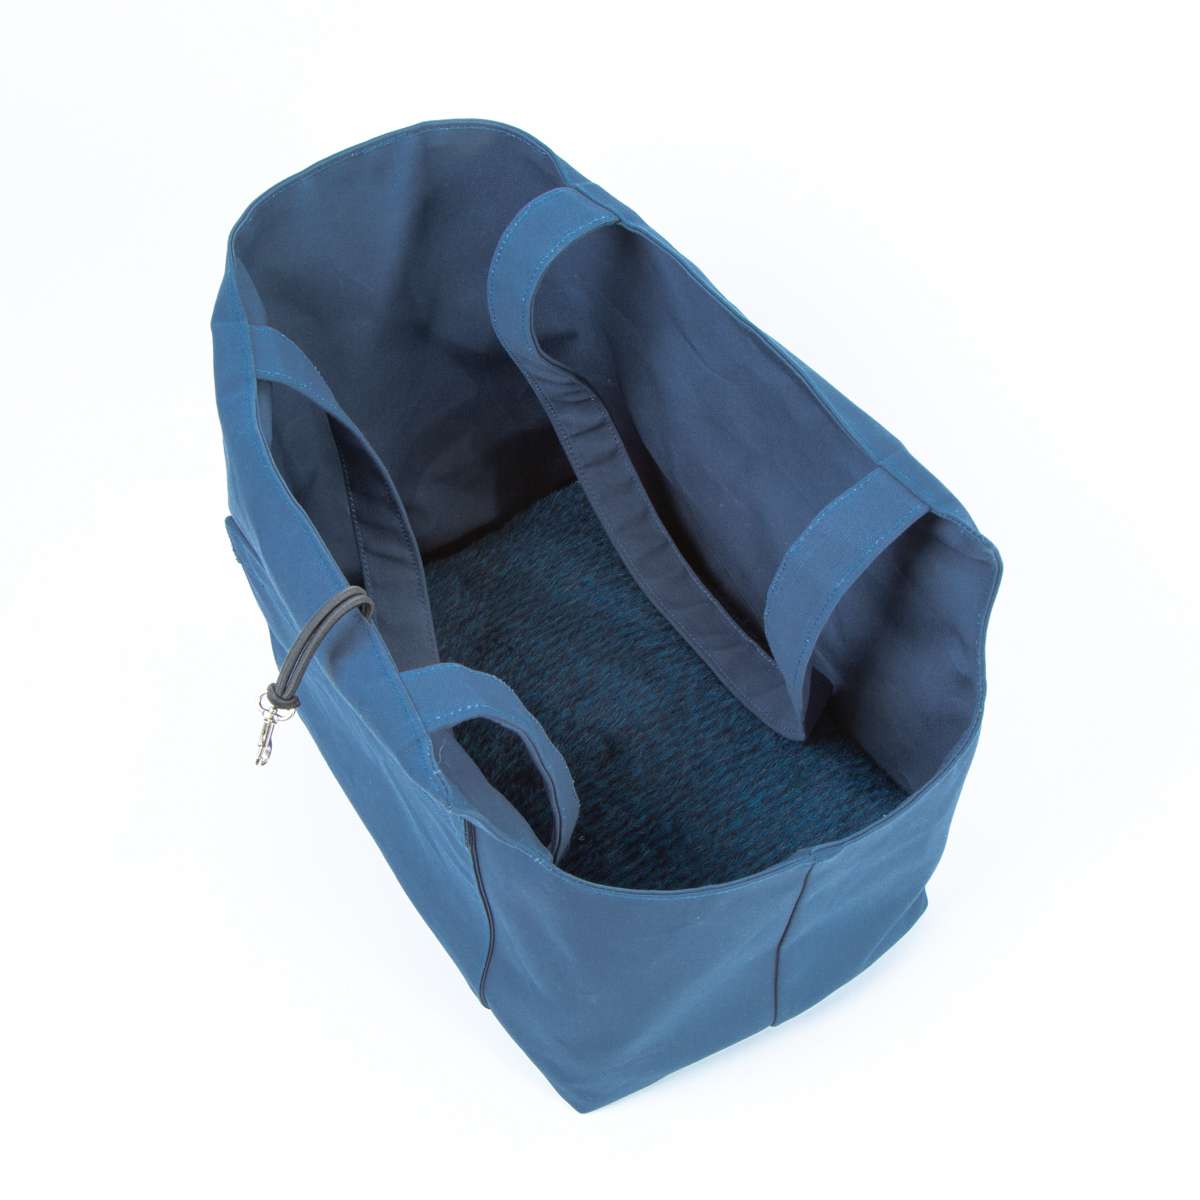 Waxed Cotton Rainy Poms Carrier Navy by SohoPoms